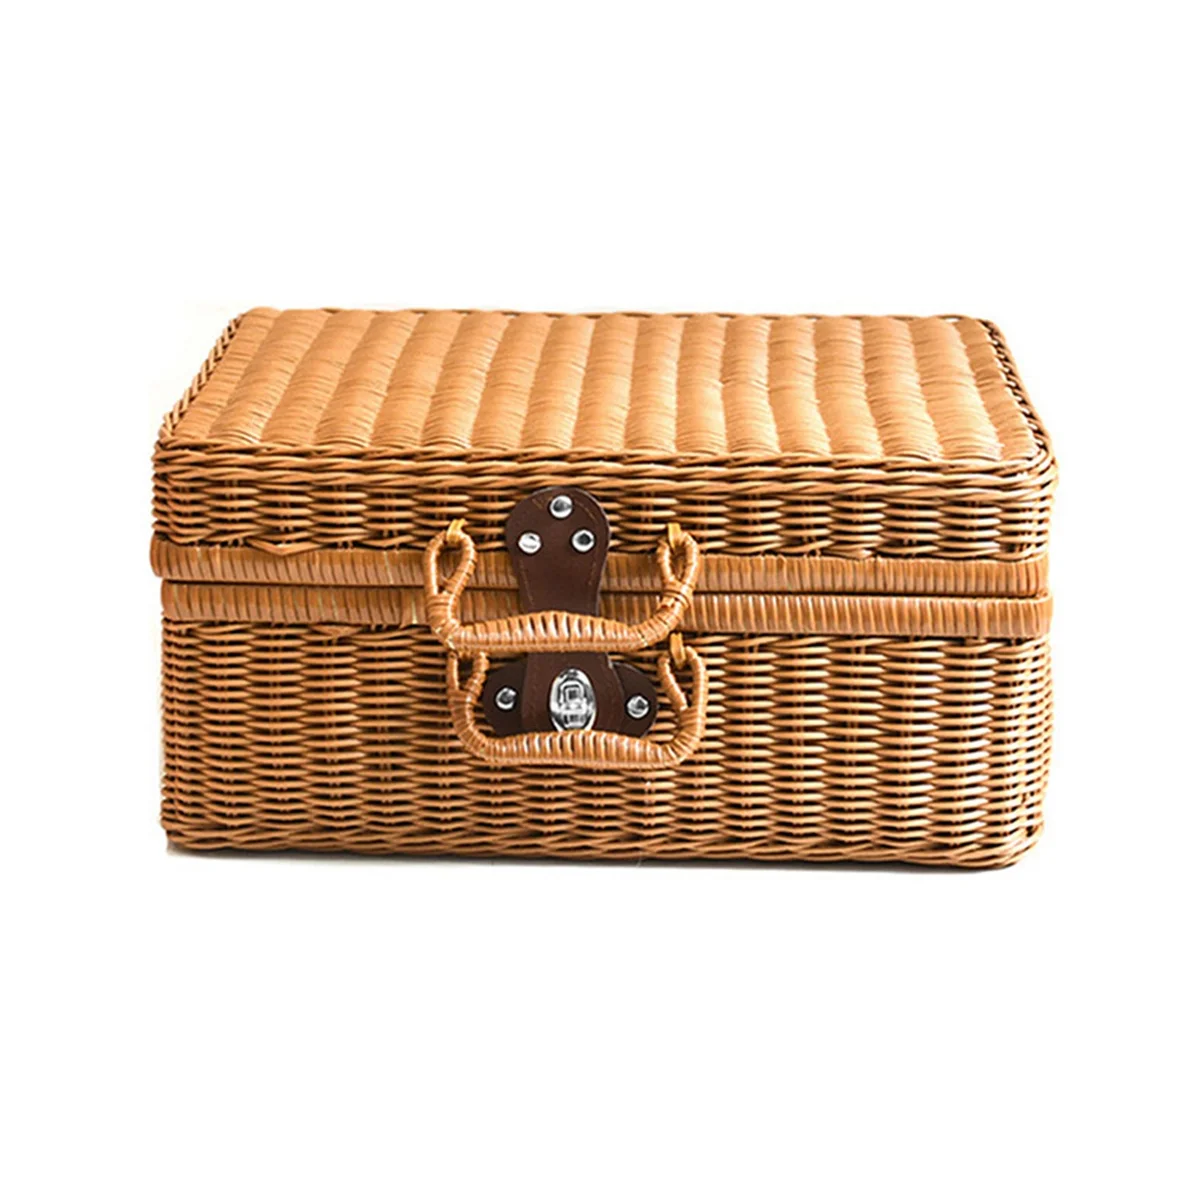 

Retro Imitation Rattan Picnic Basket Woven Suitcase Hand Woven Photography Props Home Decoration Storage Brown